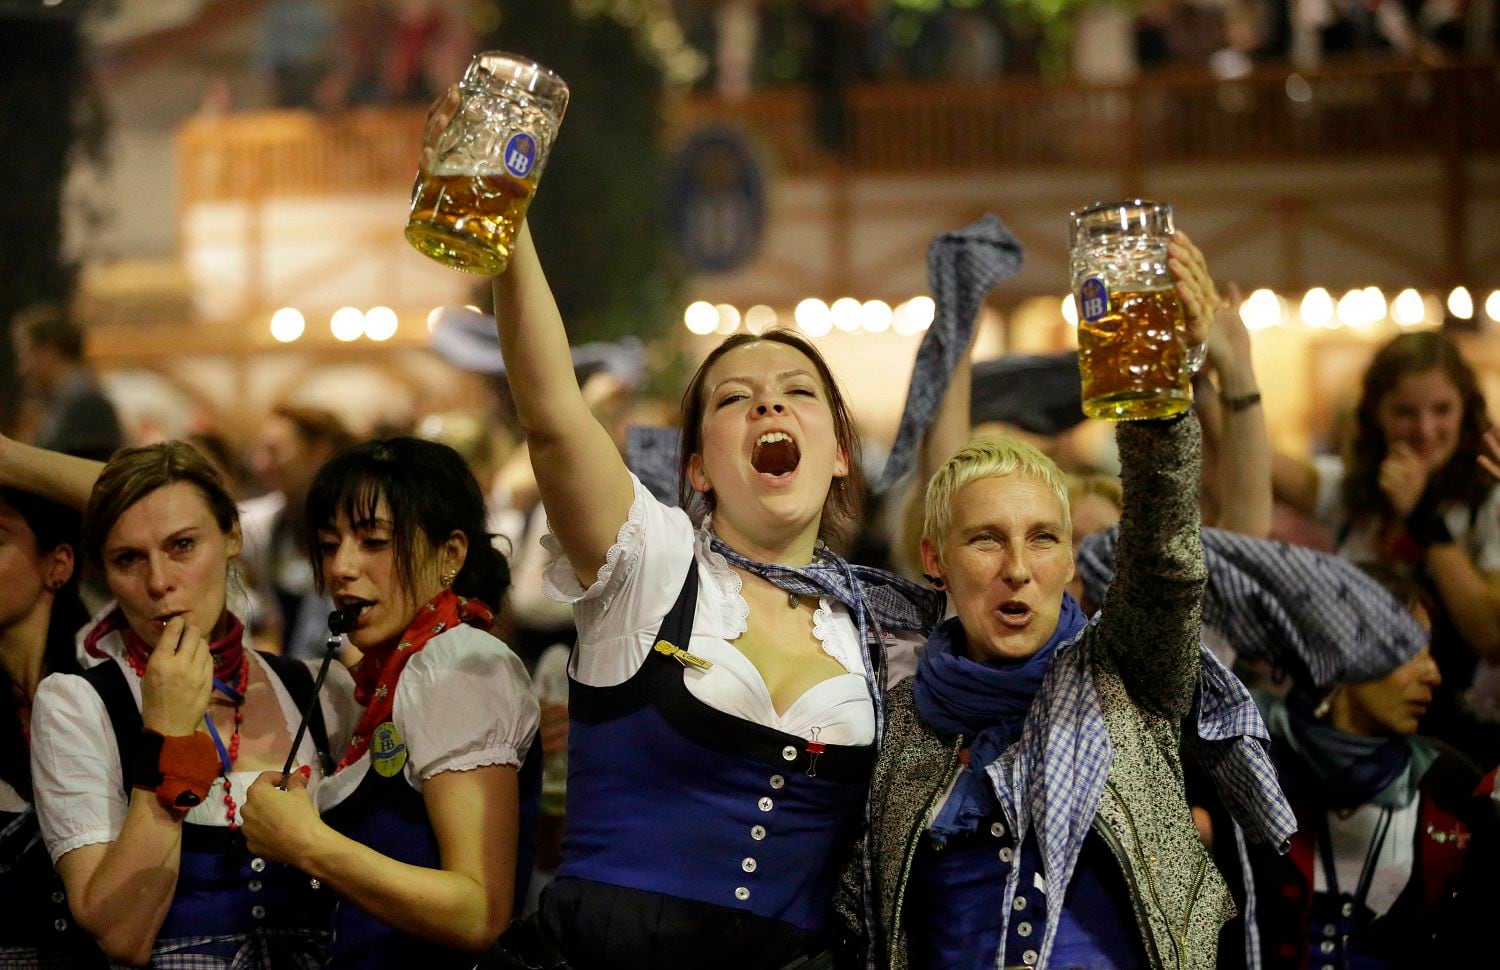 Waitresses dance on tables in a beer tent on the final evening of the famous Bavarian "Oktoberfest" beer festival in Munich, southern Germany, Sunday, Oct. 7, 2012. (AP Photo/Matthias Schrader)